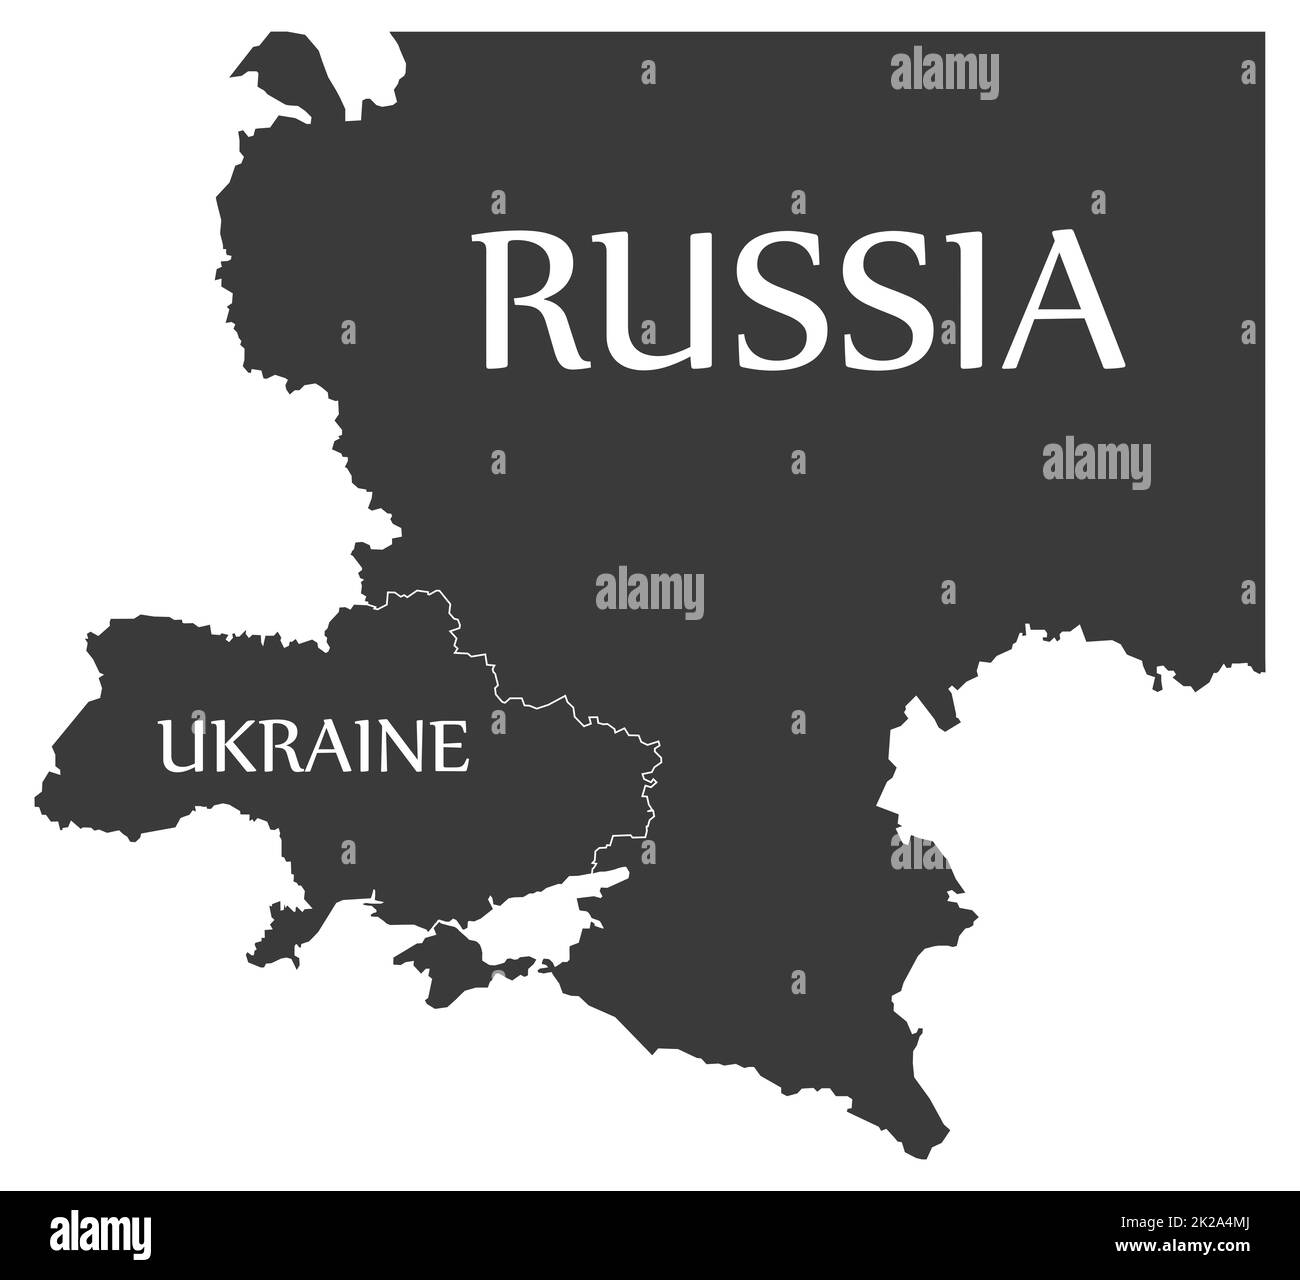 Ukraine and Russia black map with country labels Stock Photo